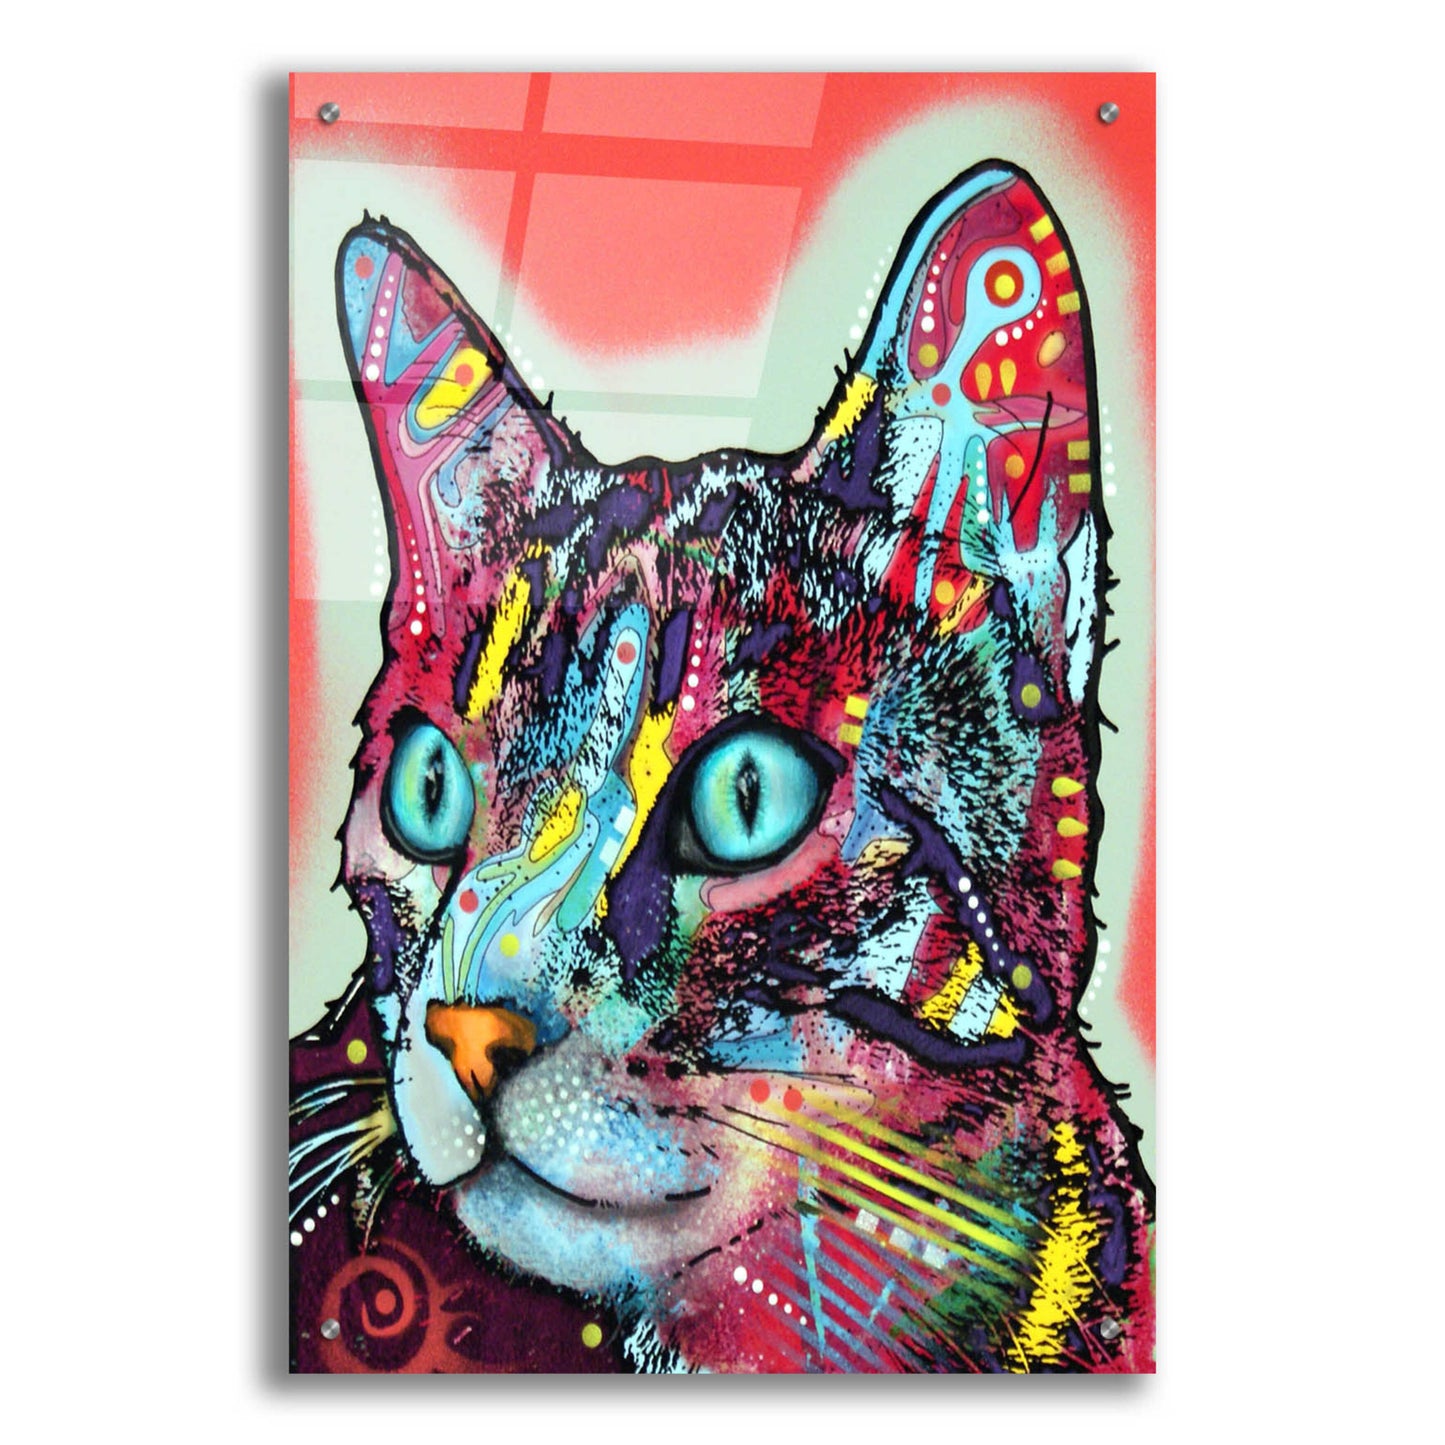 Epic Art 'Curious Cat' by Dean Russo, Acrylic Glass Wall Art,24x36